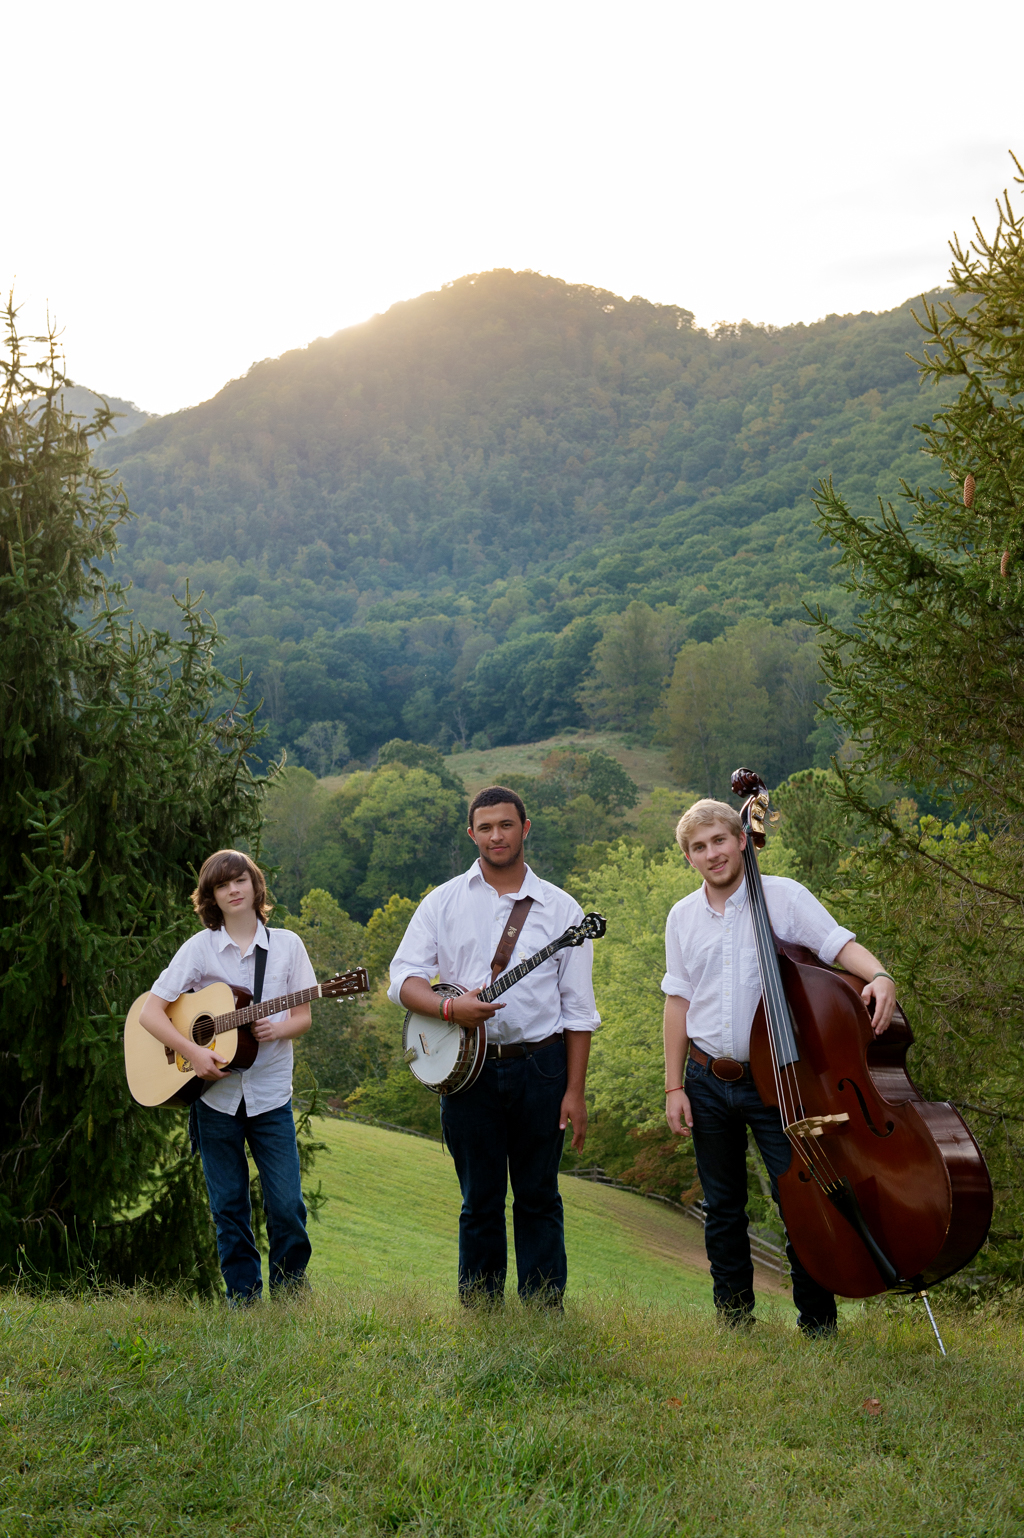 cane mill road pose with their instruments in front of mountains